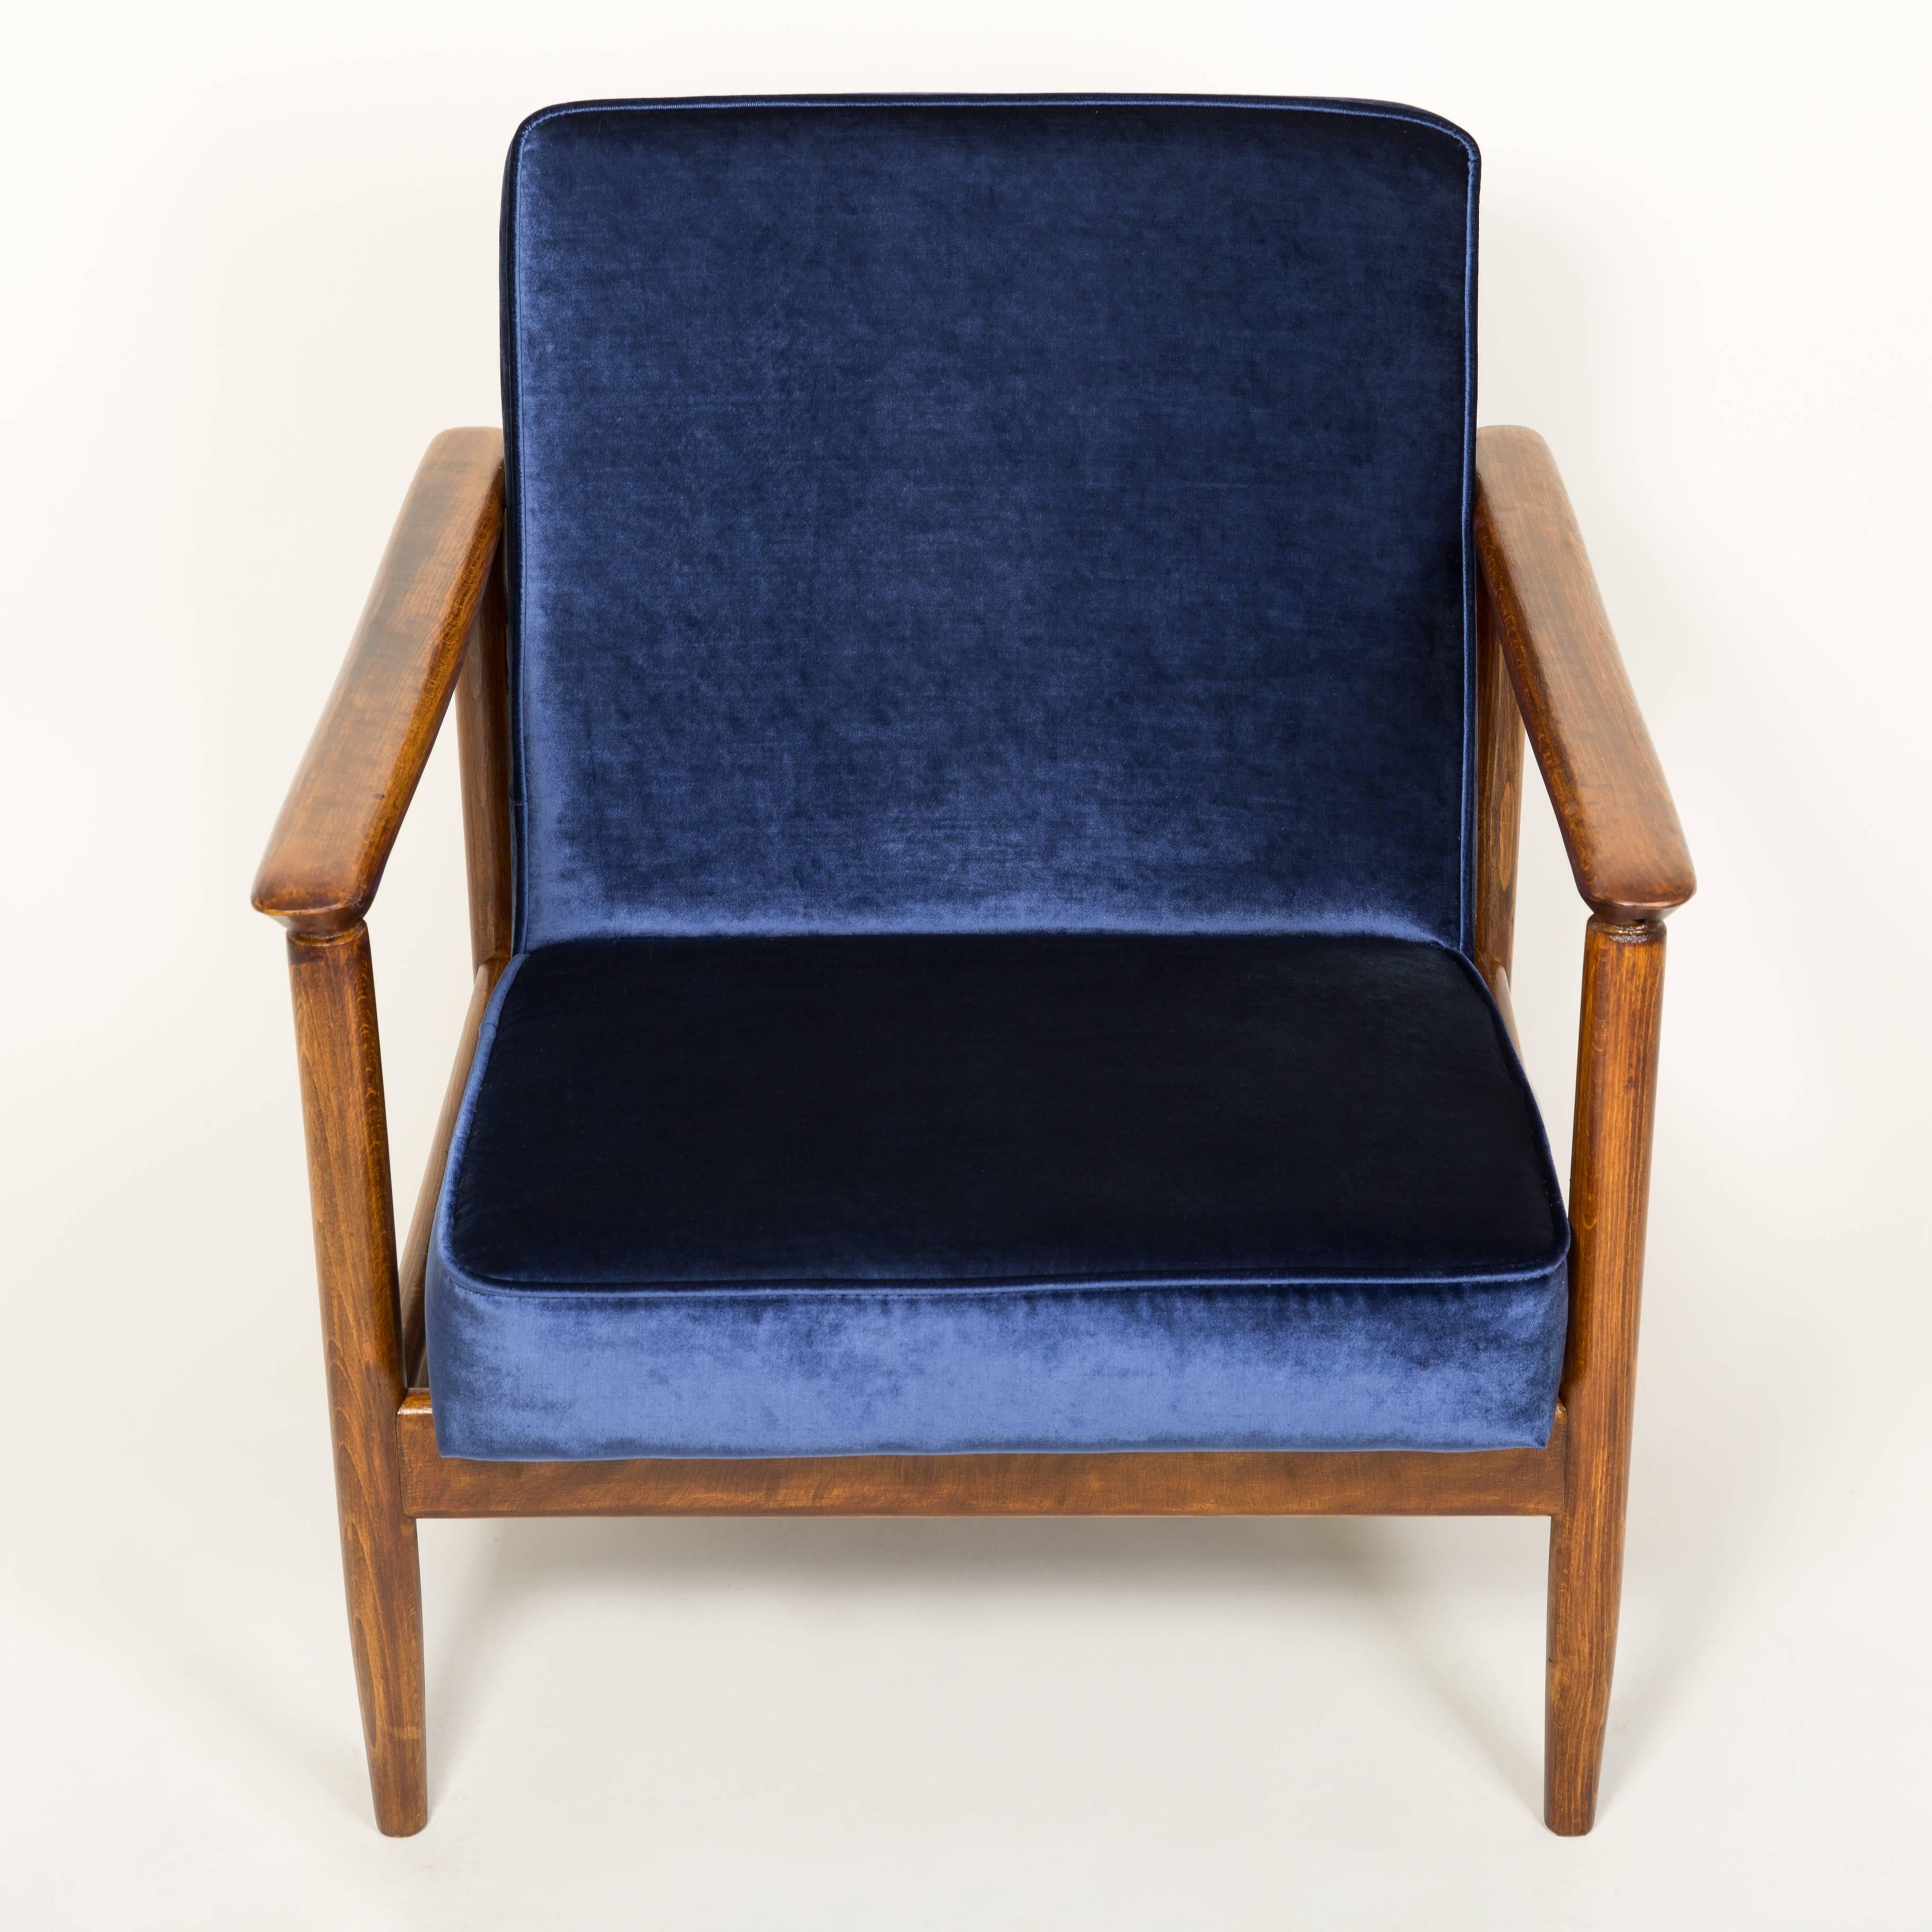 Beautiful armchairs model GFM-142, designed by Edmund Homa. The armchairs were made in the 1960s in the Gosciecinska Furniture Factory. Frame is made from solid beech wood. The GFM-142 armchair is regarded one of the best Polish armchair design from